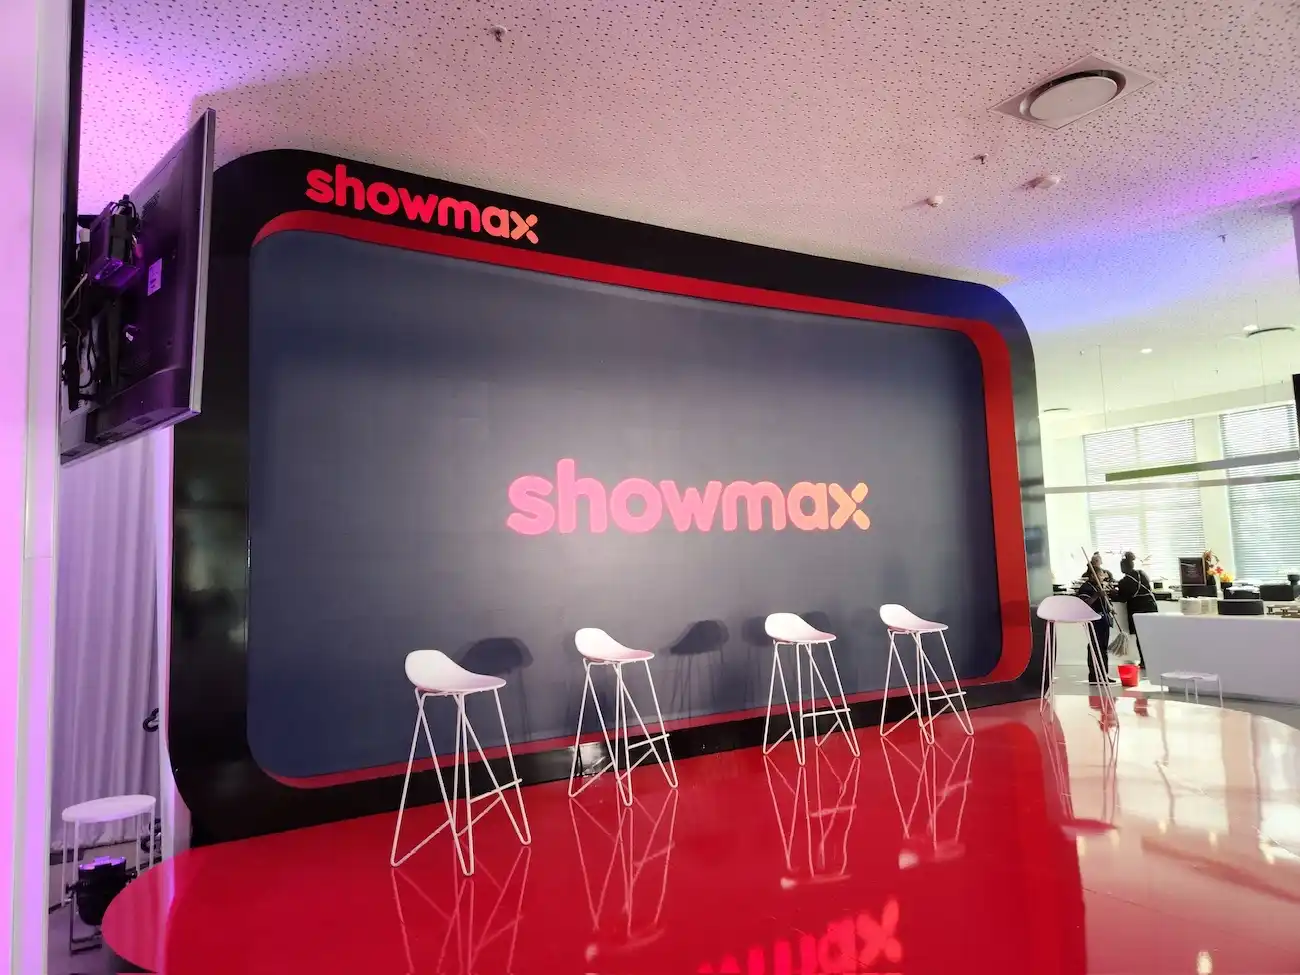 Showmax 2.0 packages